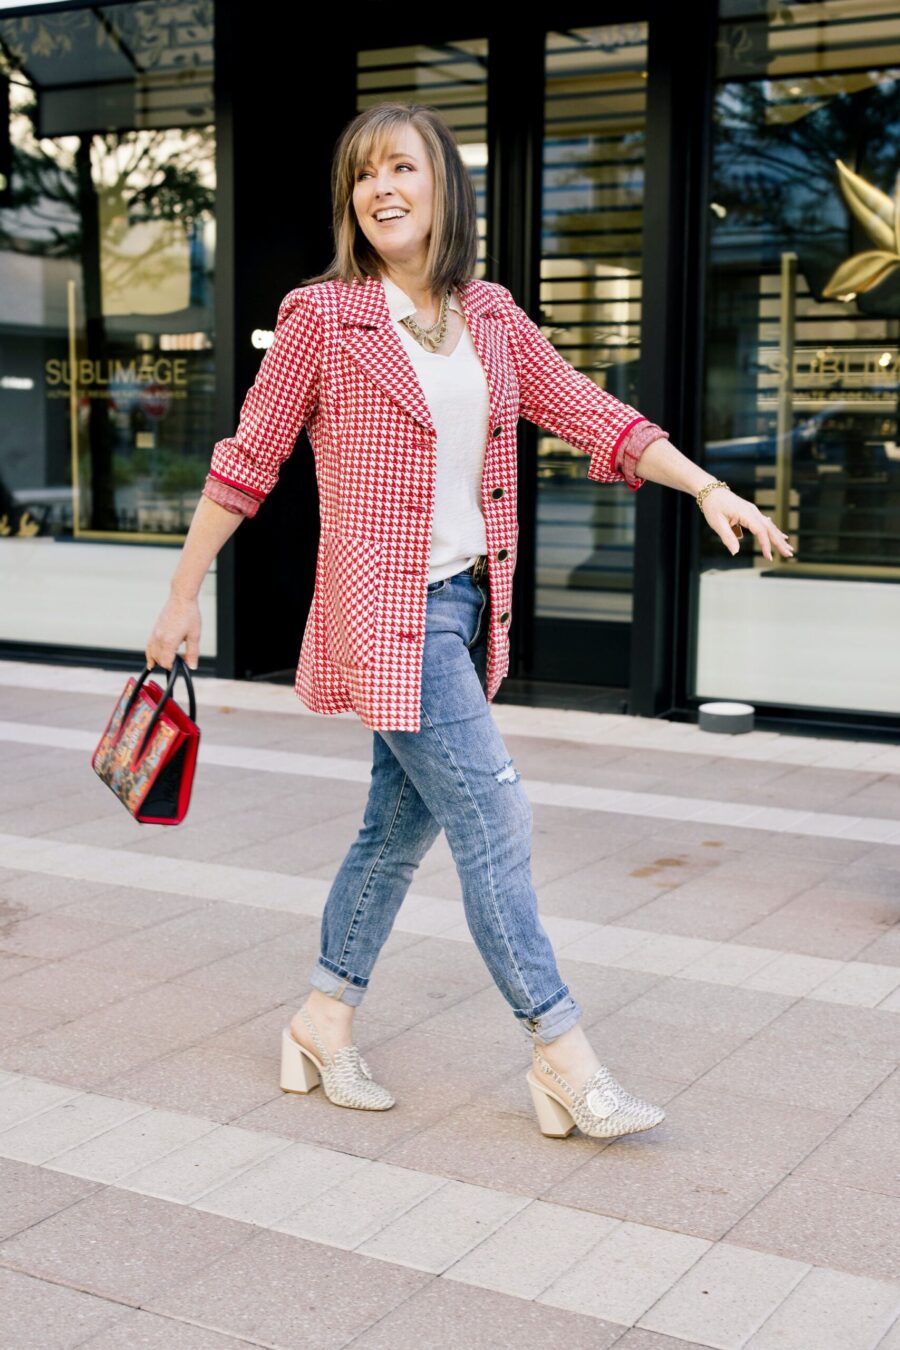 chic denim outfit with houndstooth jacket